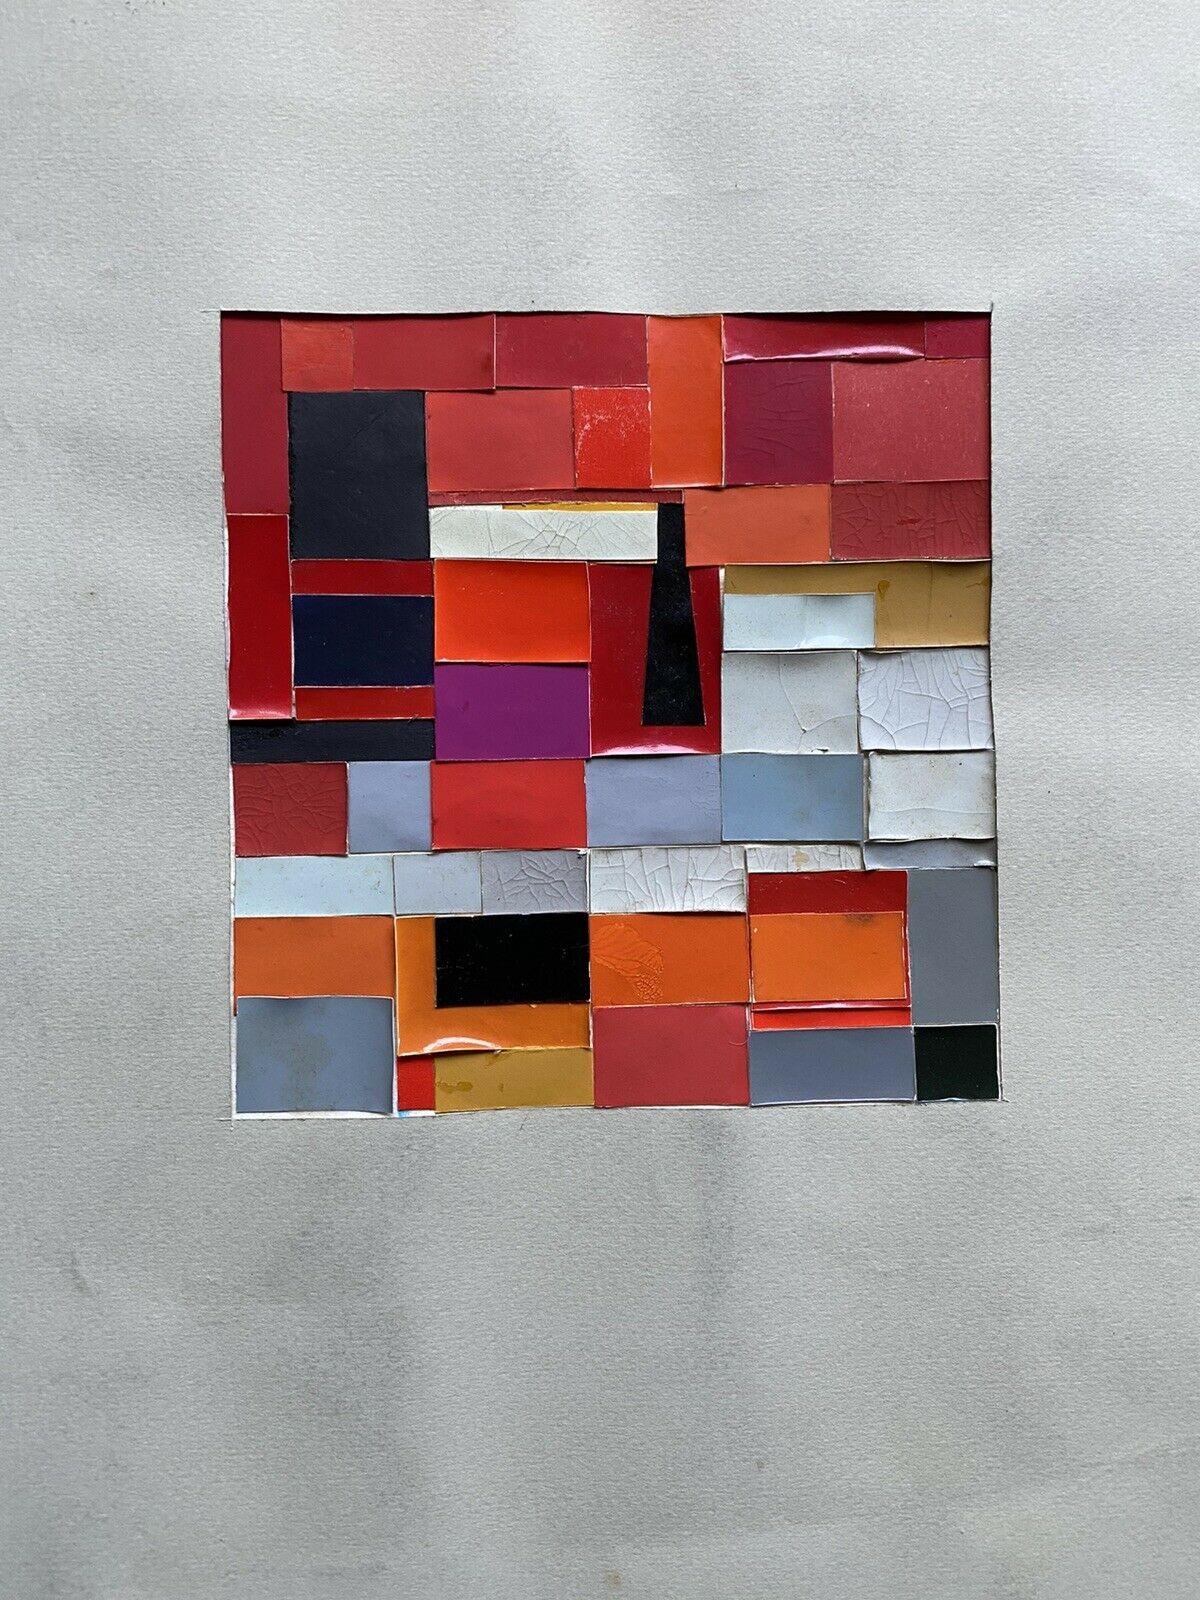 CLAUDE LAGOUCHE (1943-2020) ORIGNAL 1970'S FRENCH CUBIST ABSTRACT COLLAGE WORK - Painting by Claude Lagouche